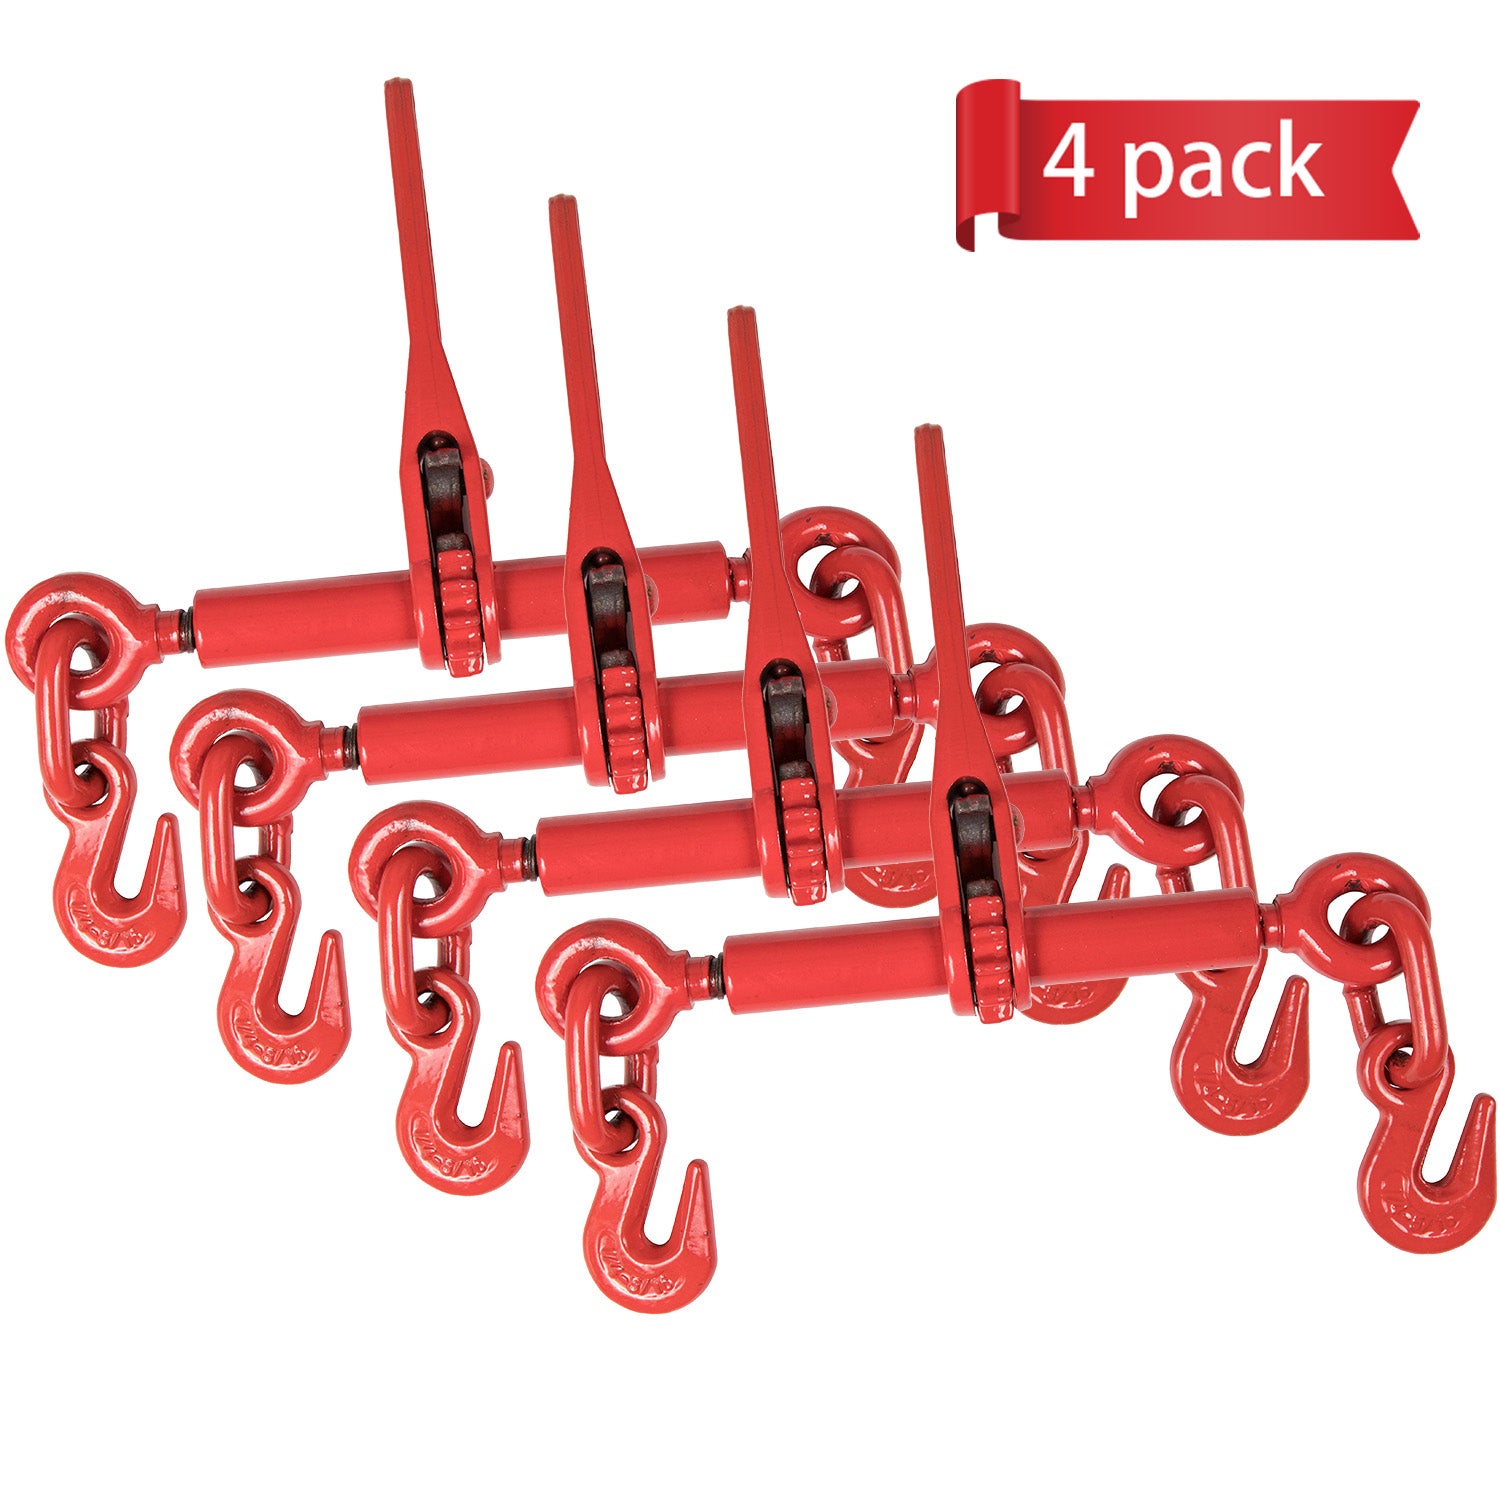 Aain EI001A4 Ratchet Load Binders, 1/4-5/16'' 4 Pack, Red, 4 Count